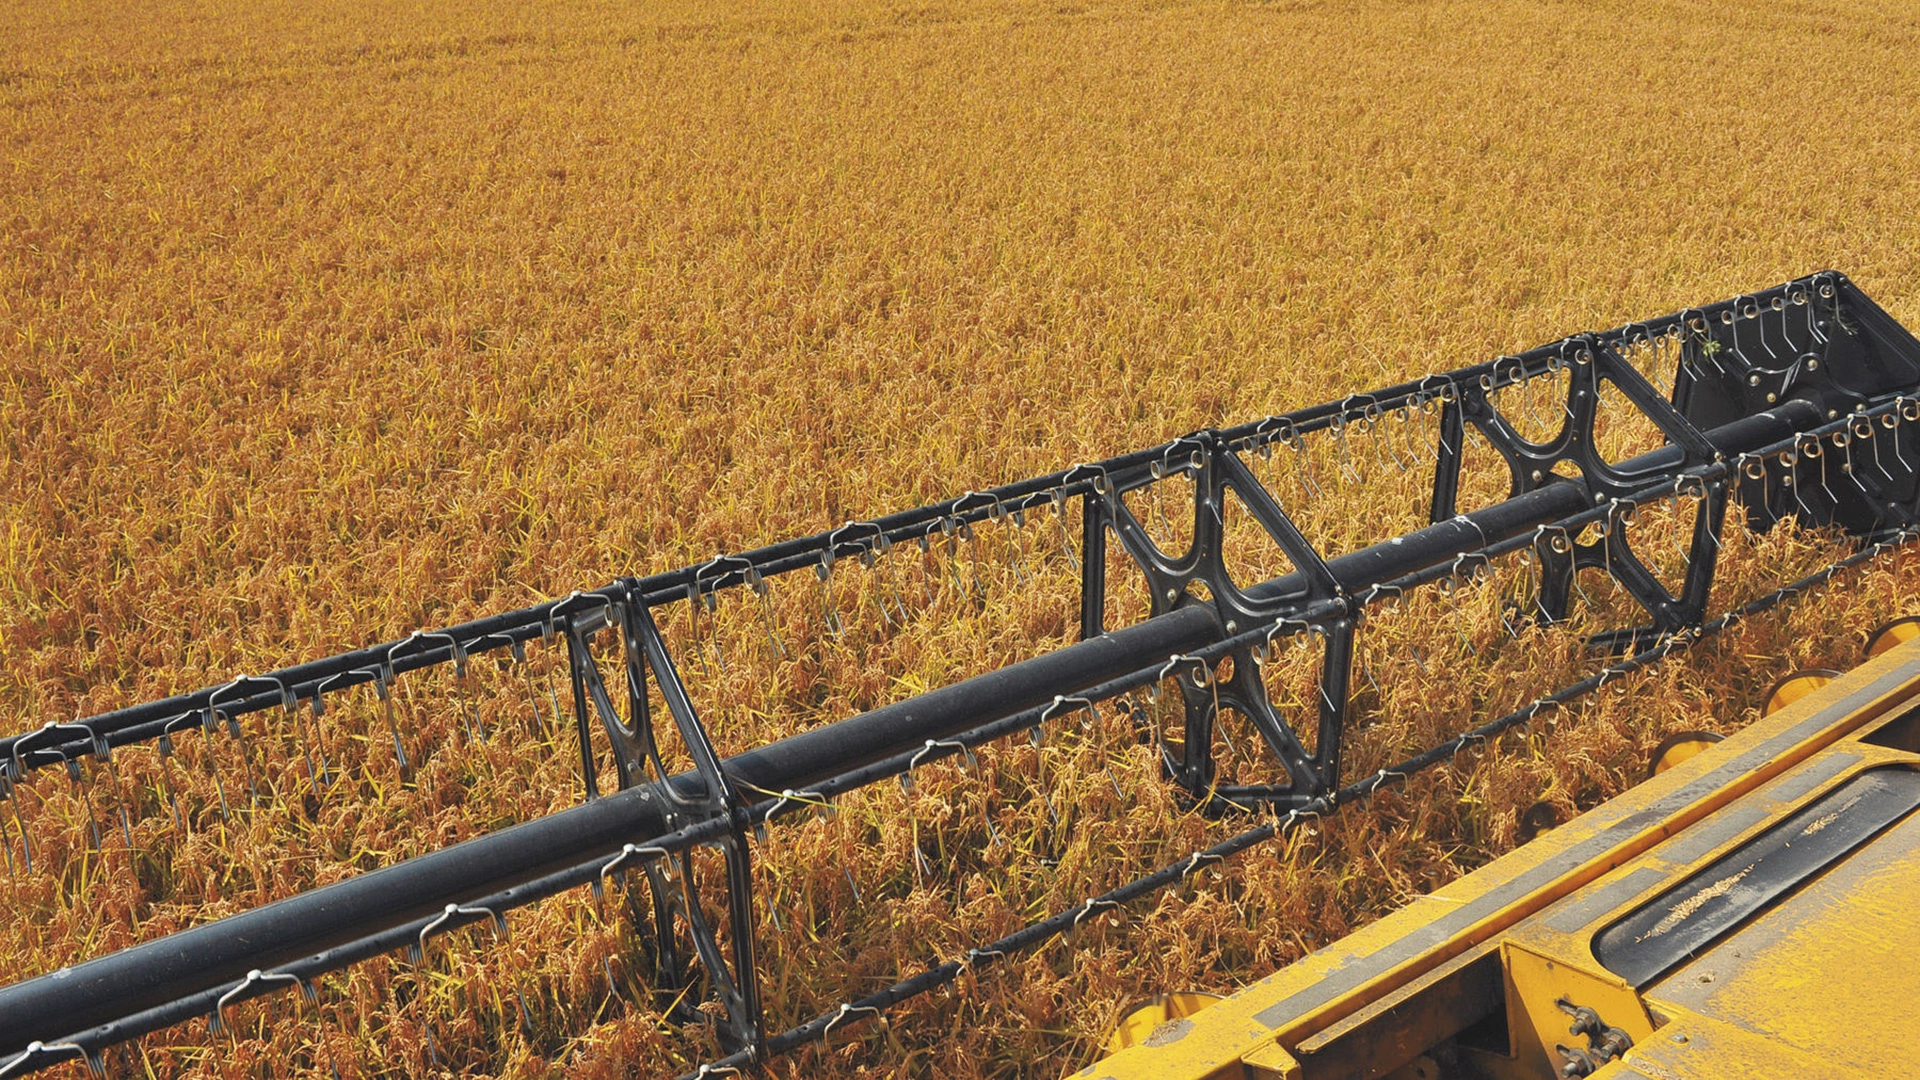 High capacity grain harvester; detailed view of cutting mechanism over golden wheat field, ready for harvest.